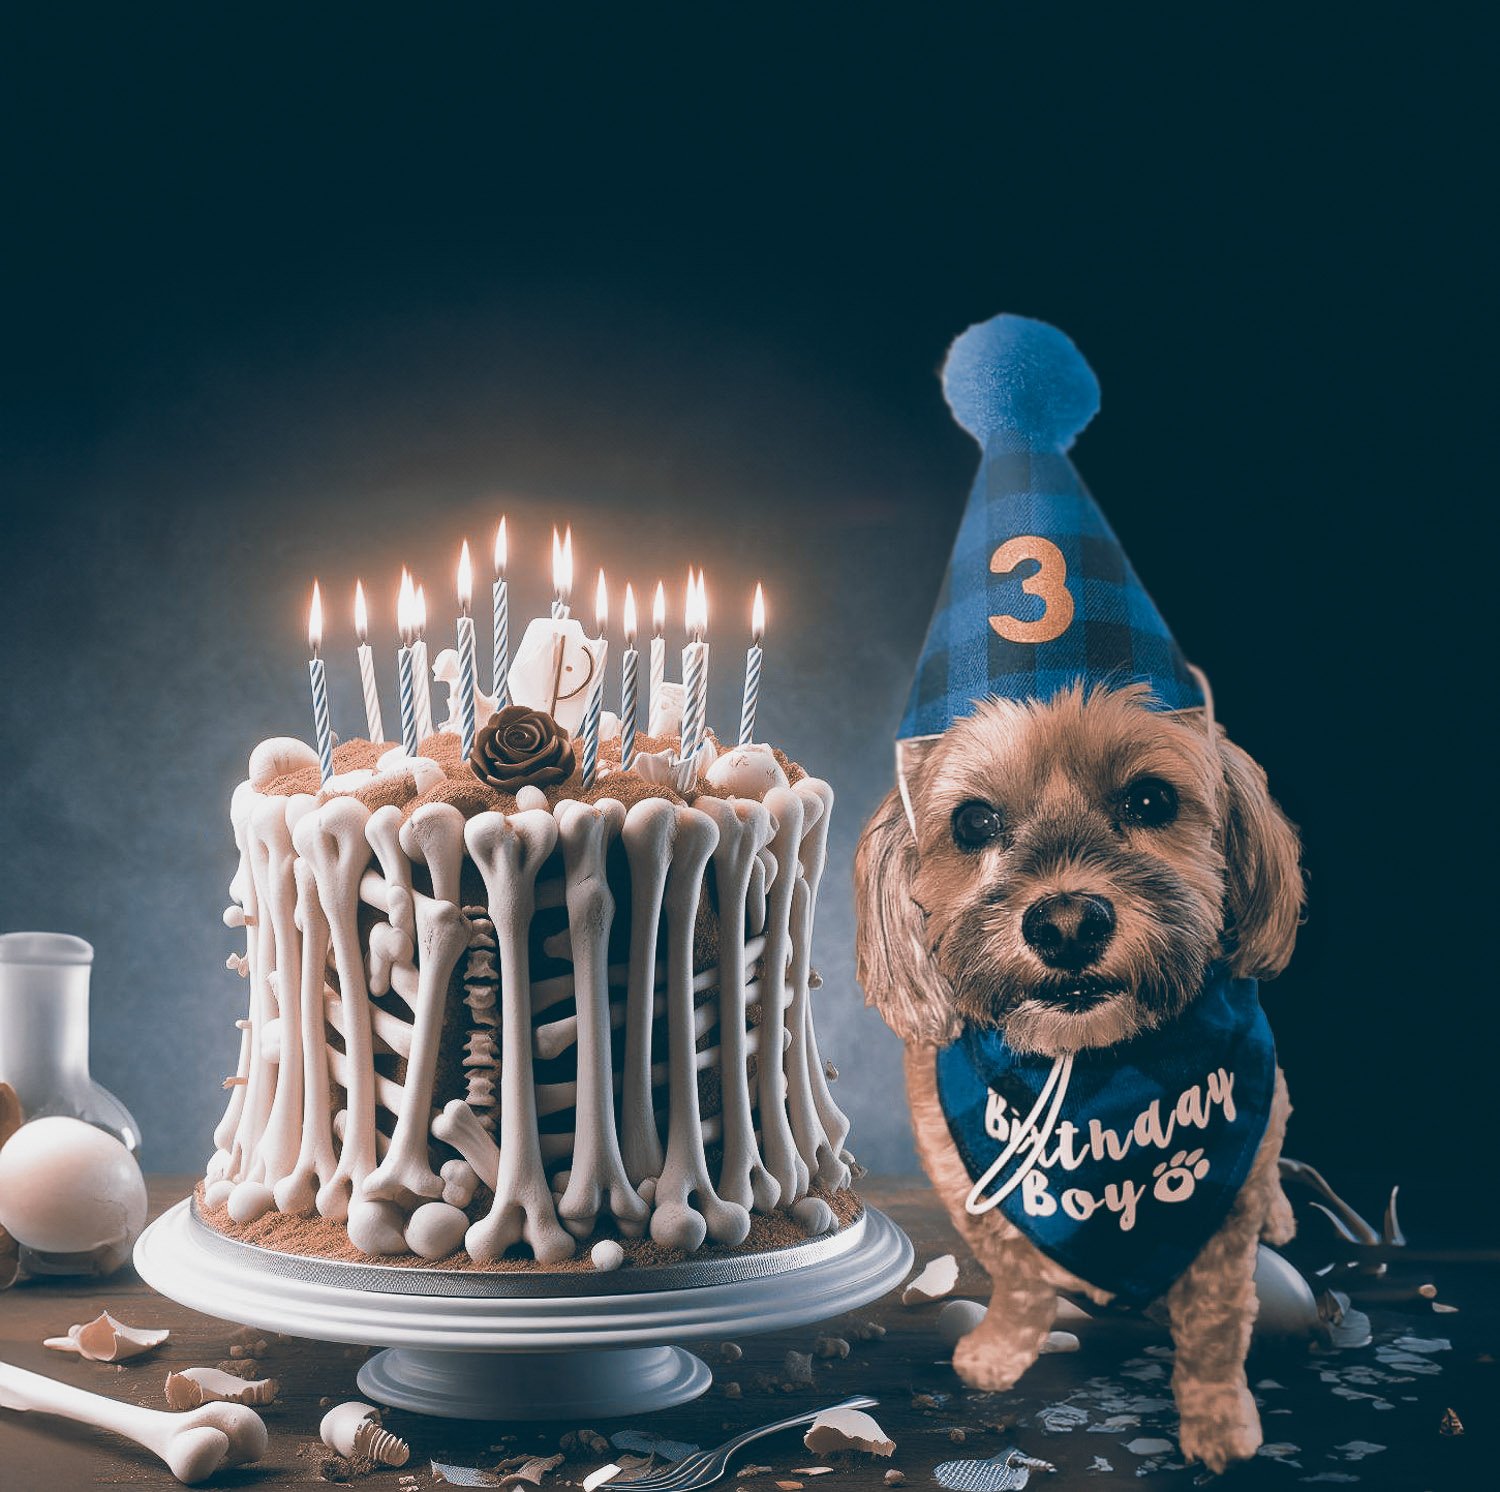 A small wiry haired dog wearing a blue party hat and bib sitting next to a bone birthday cake